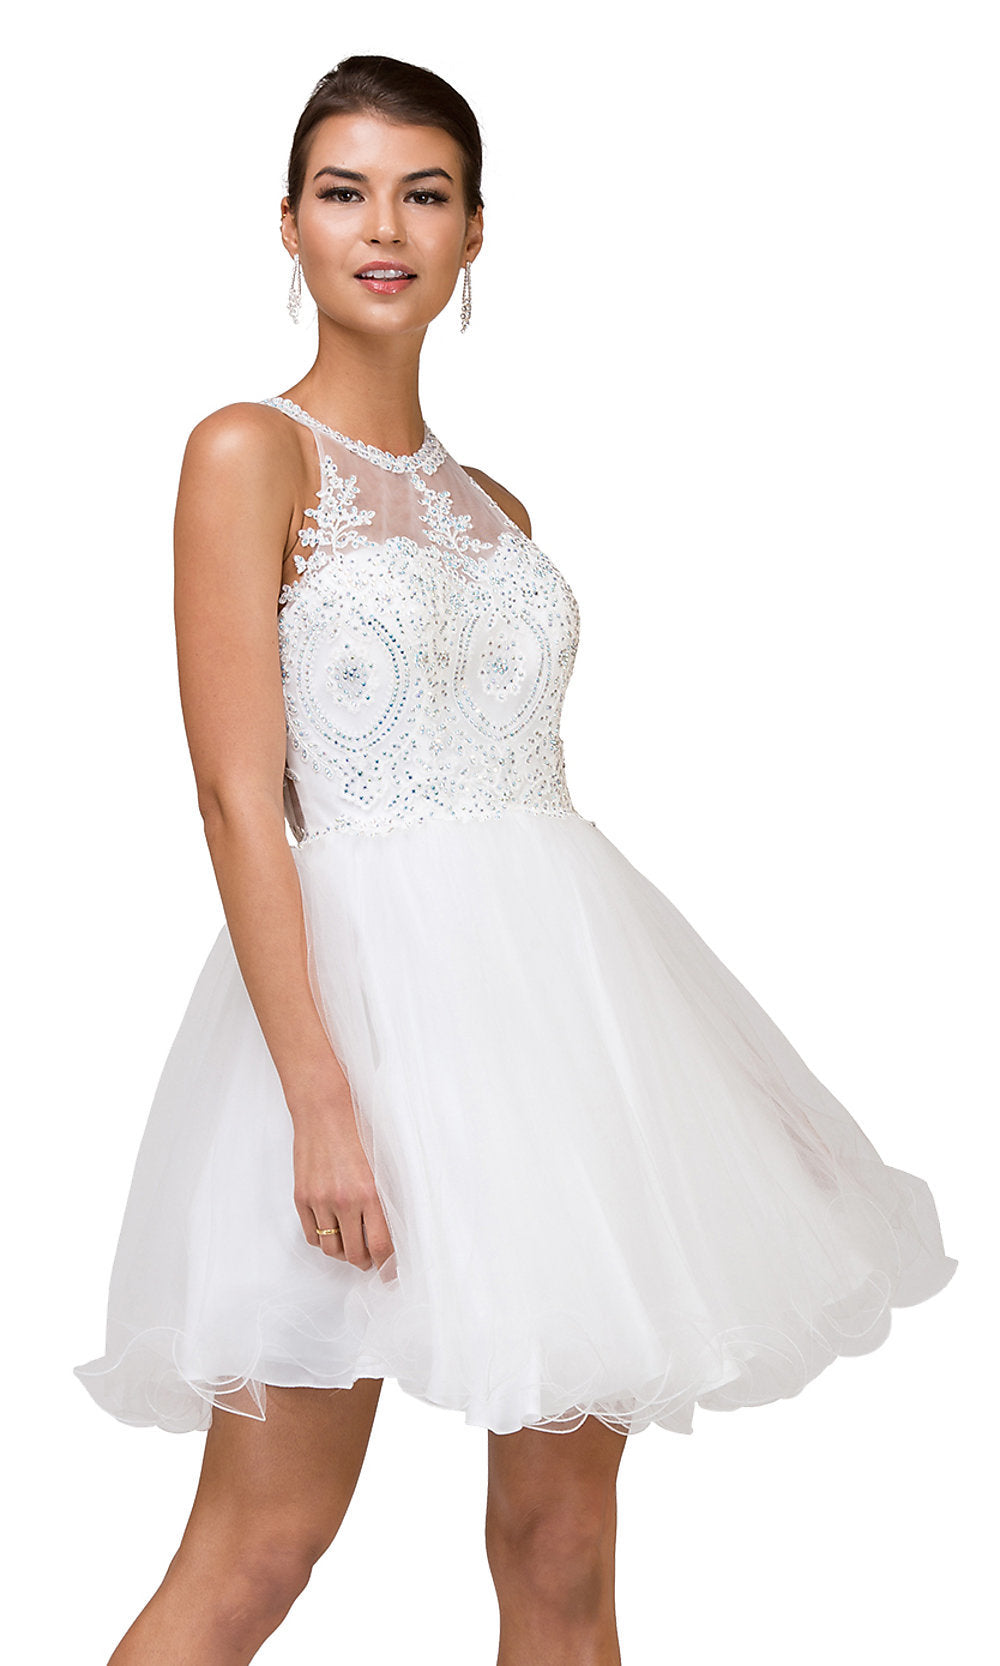 Off White High-Neck Babydoll Fancy Short Homecoming Dress